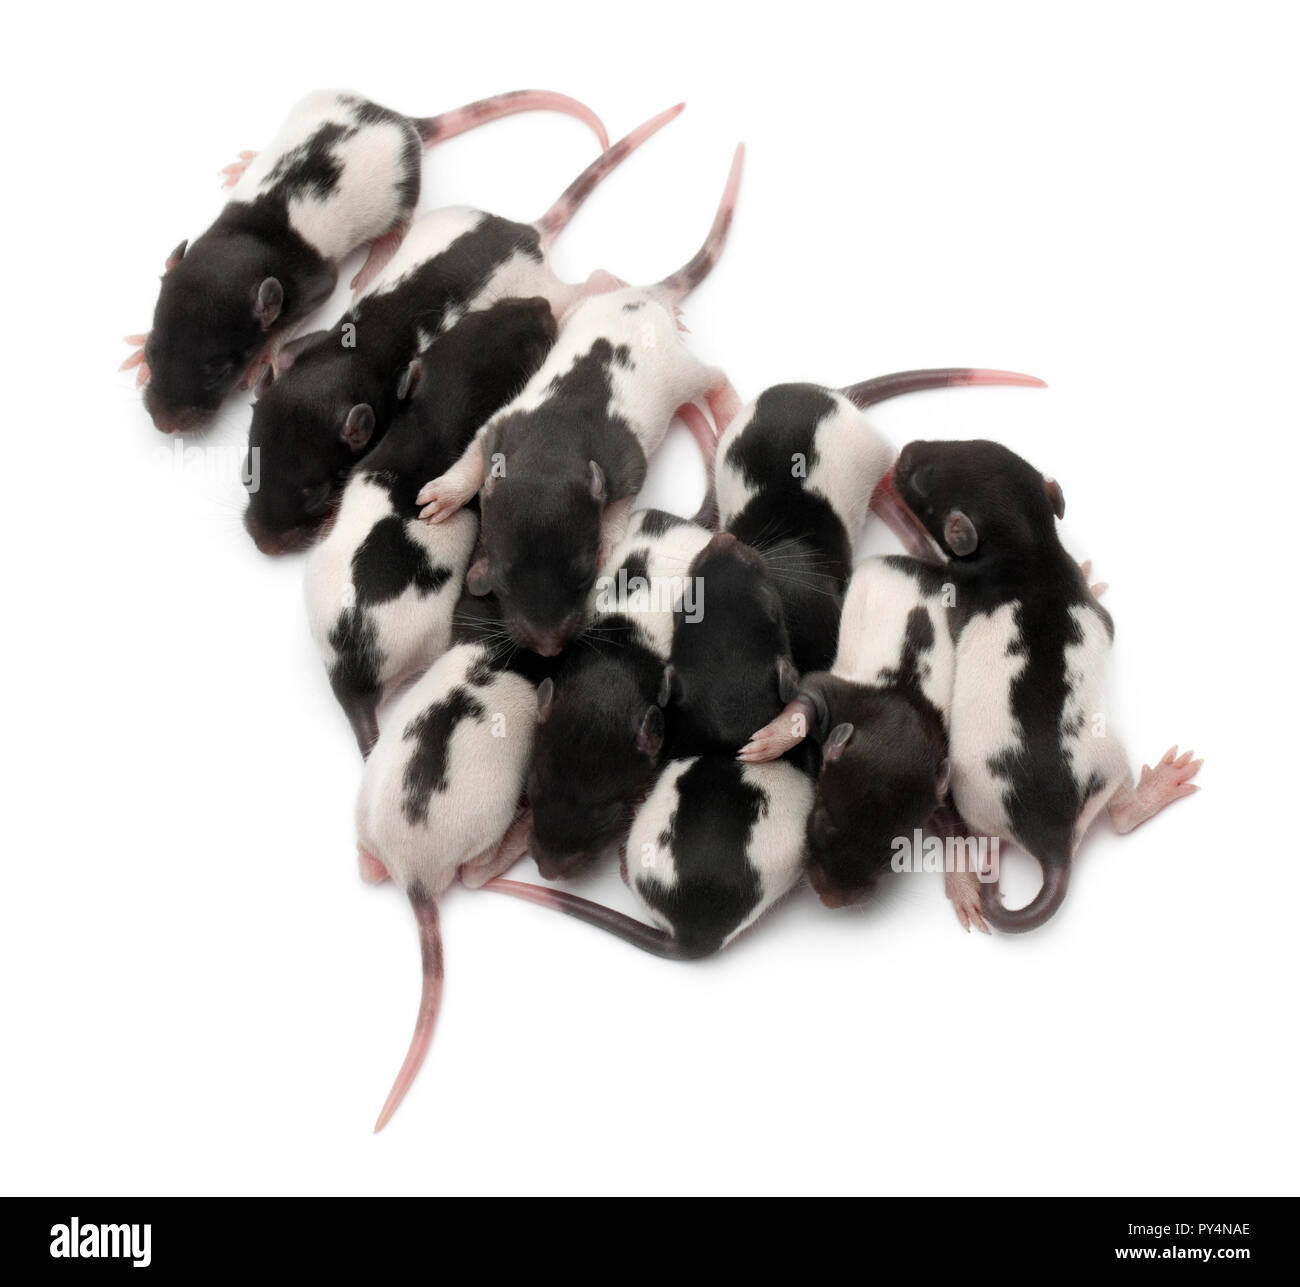 High angle view of a group of Fancy rats babies sleeping in front of white background Stock Photo